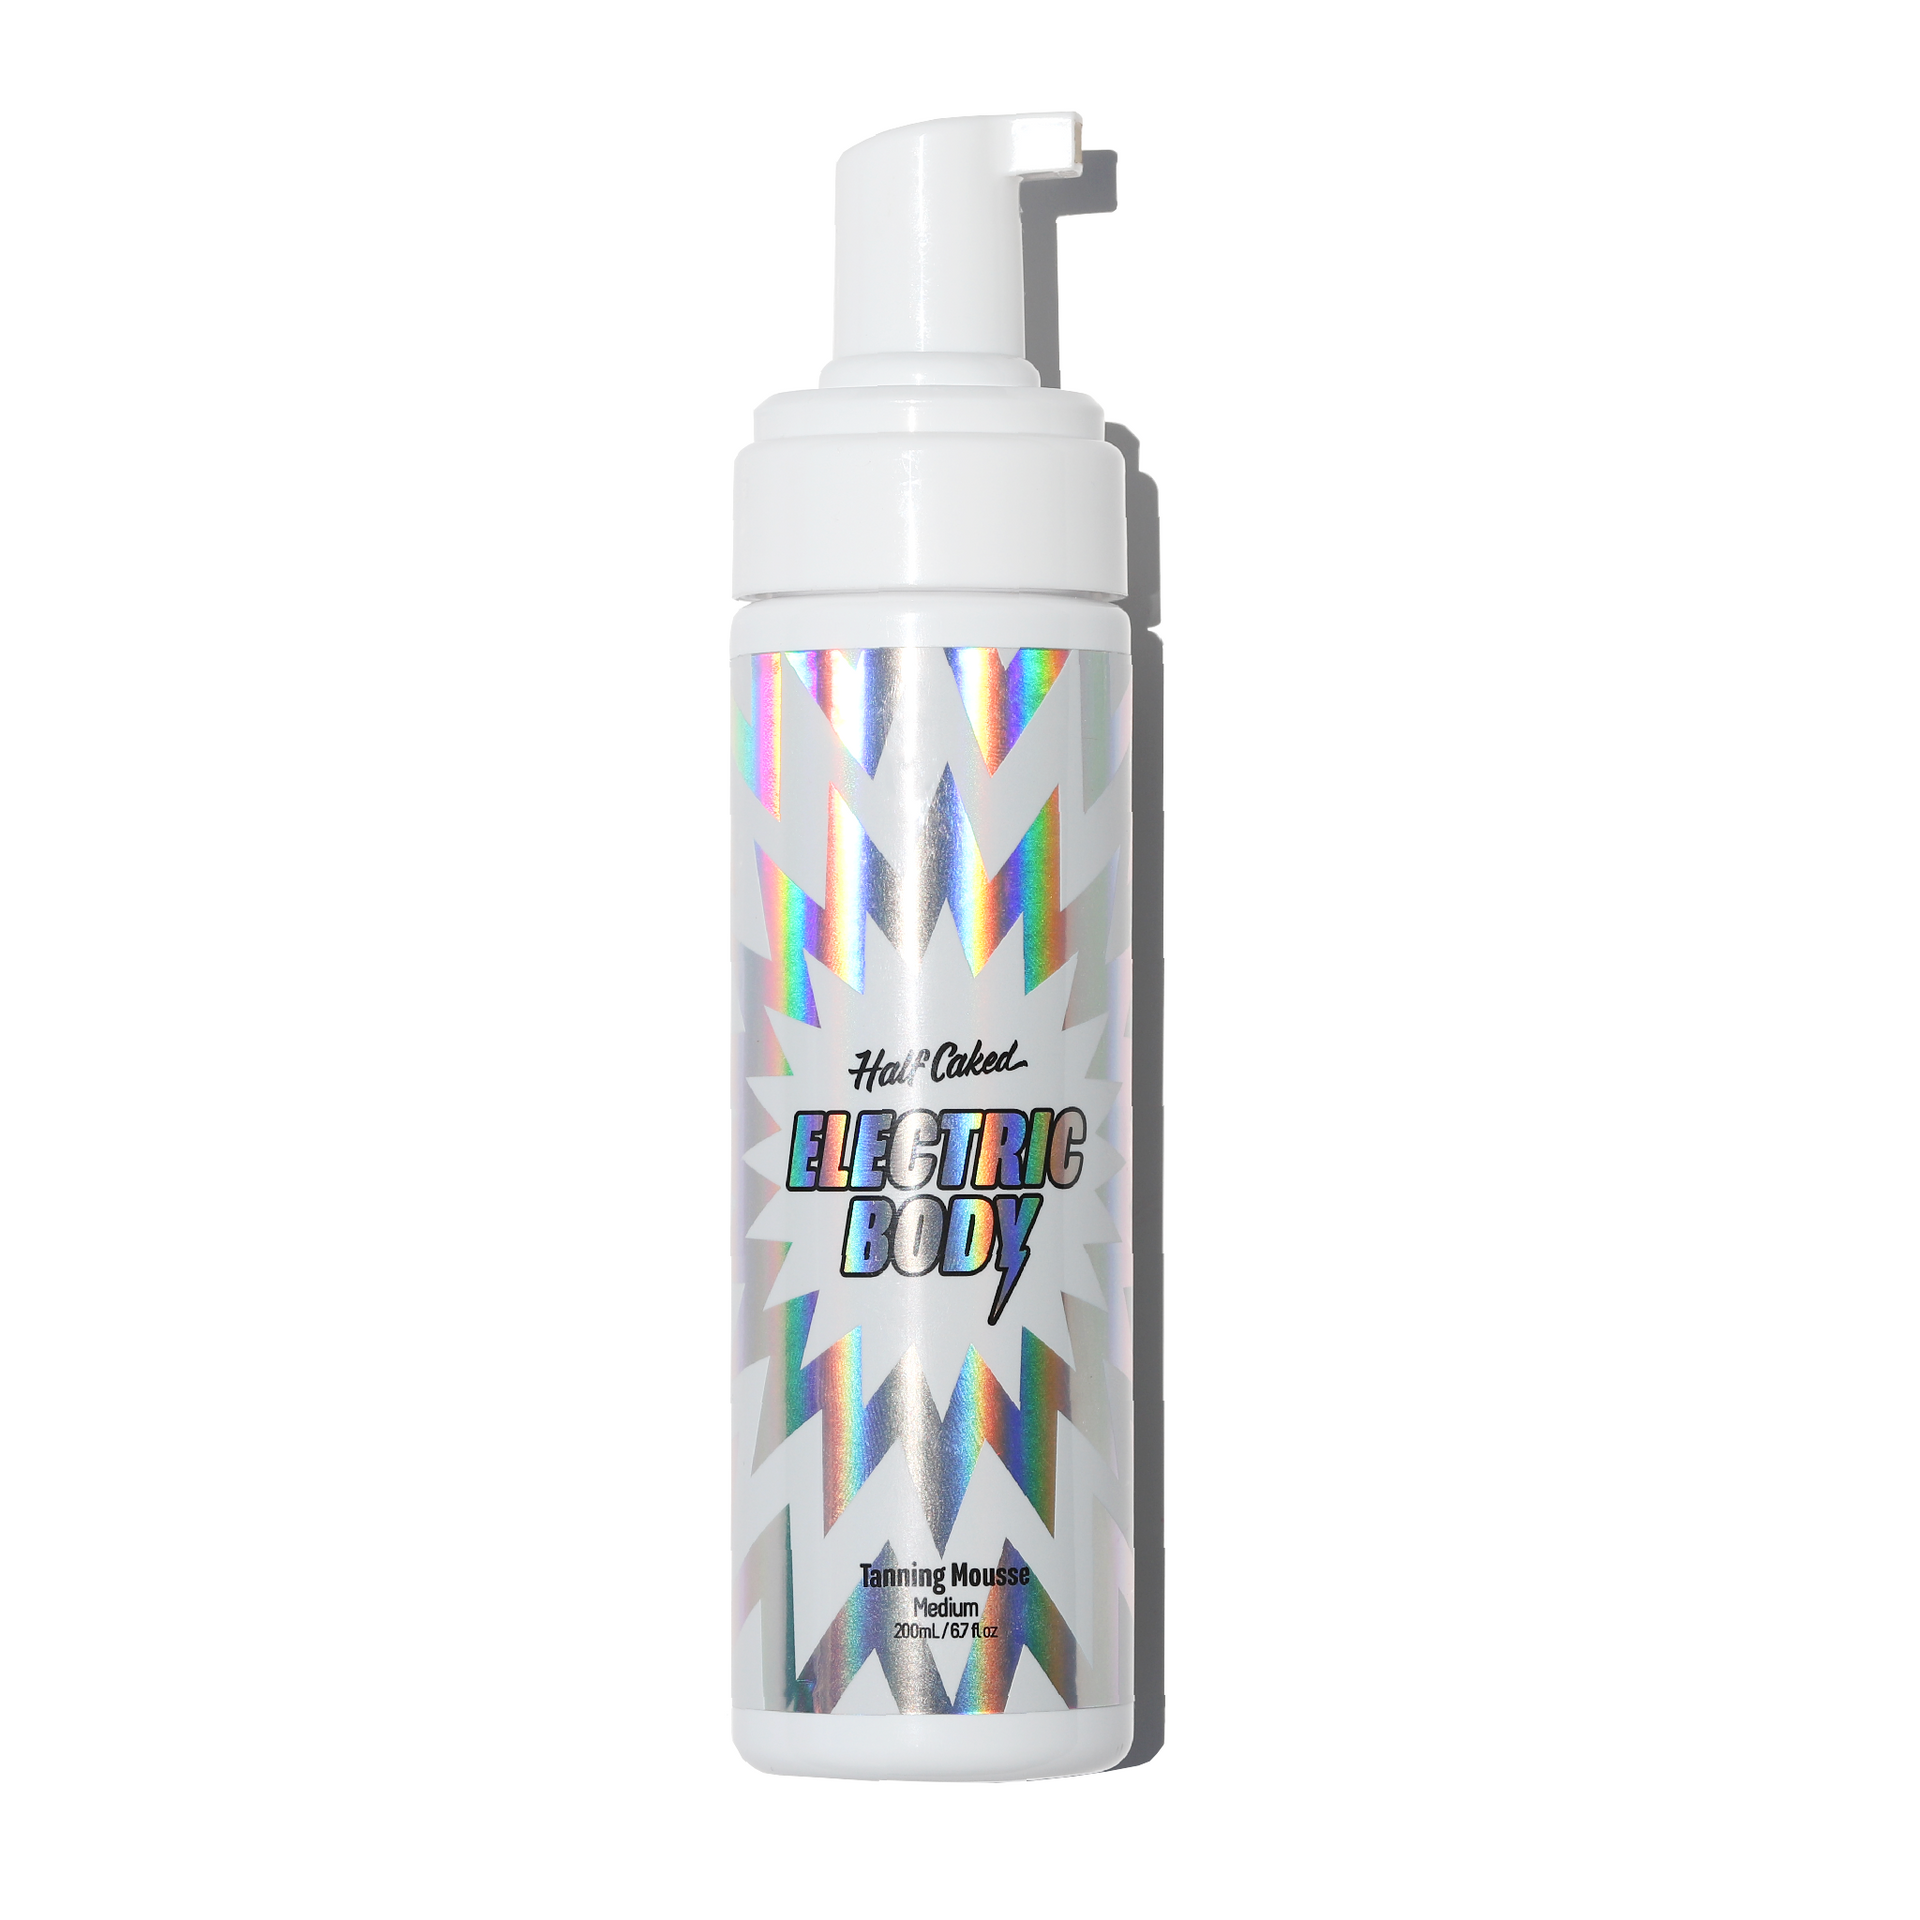 Electric Body Tanning Mousse - Half Caked